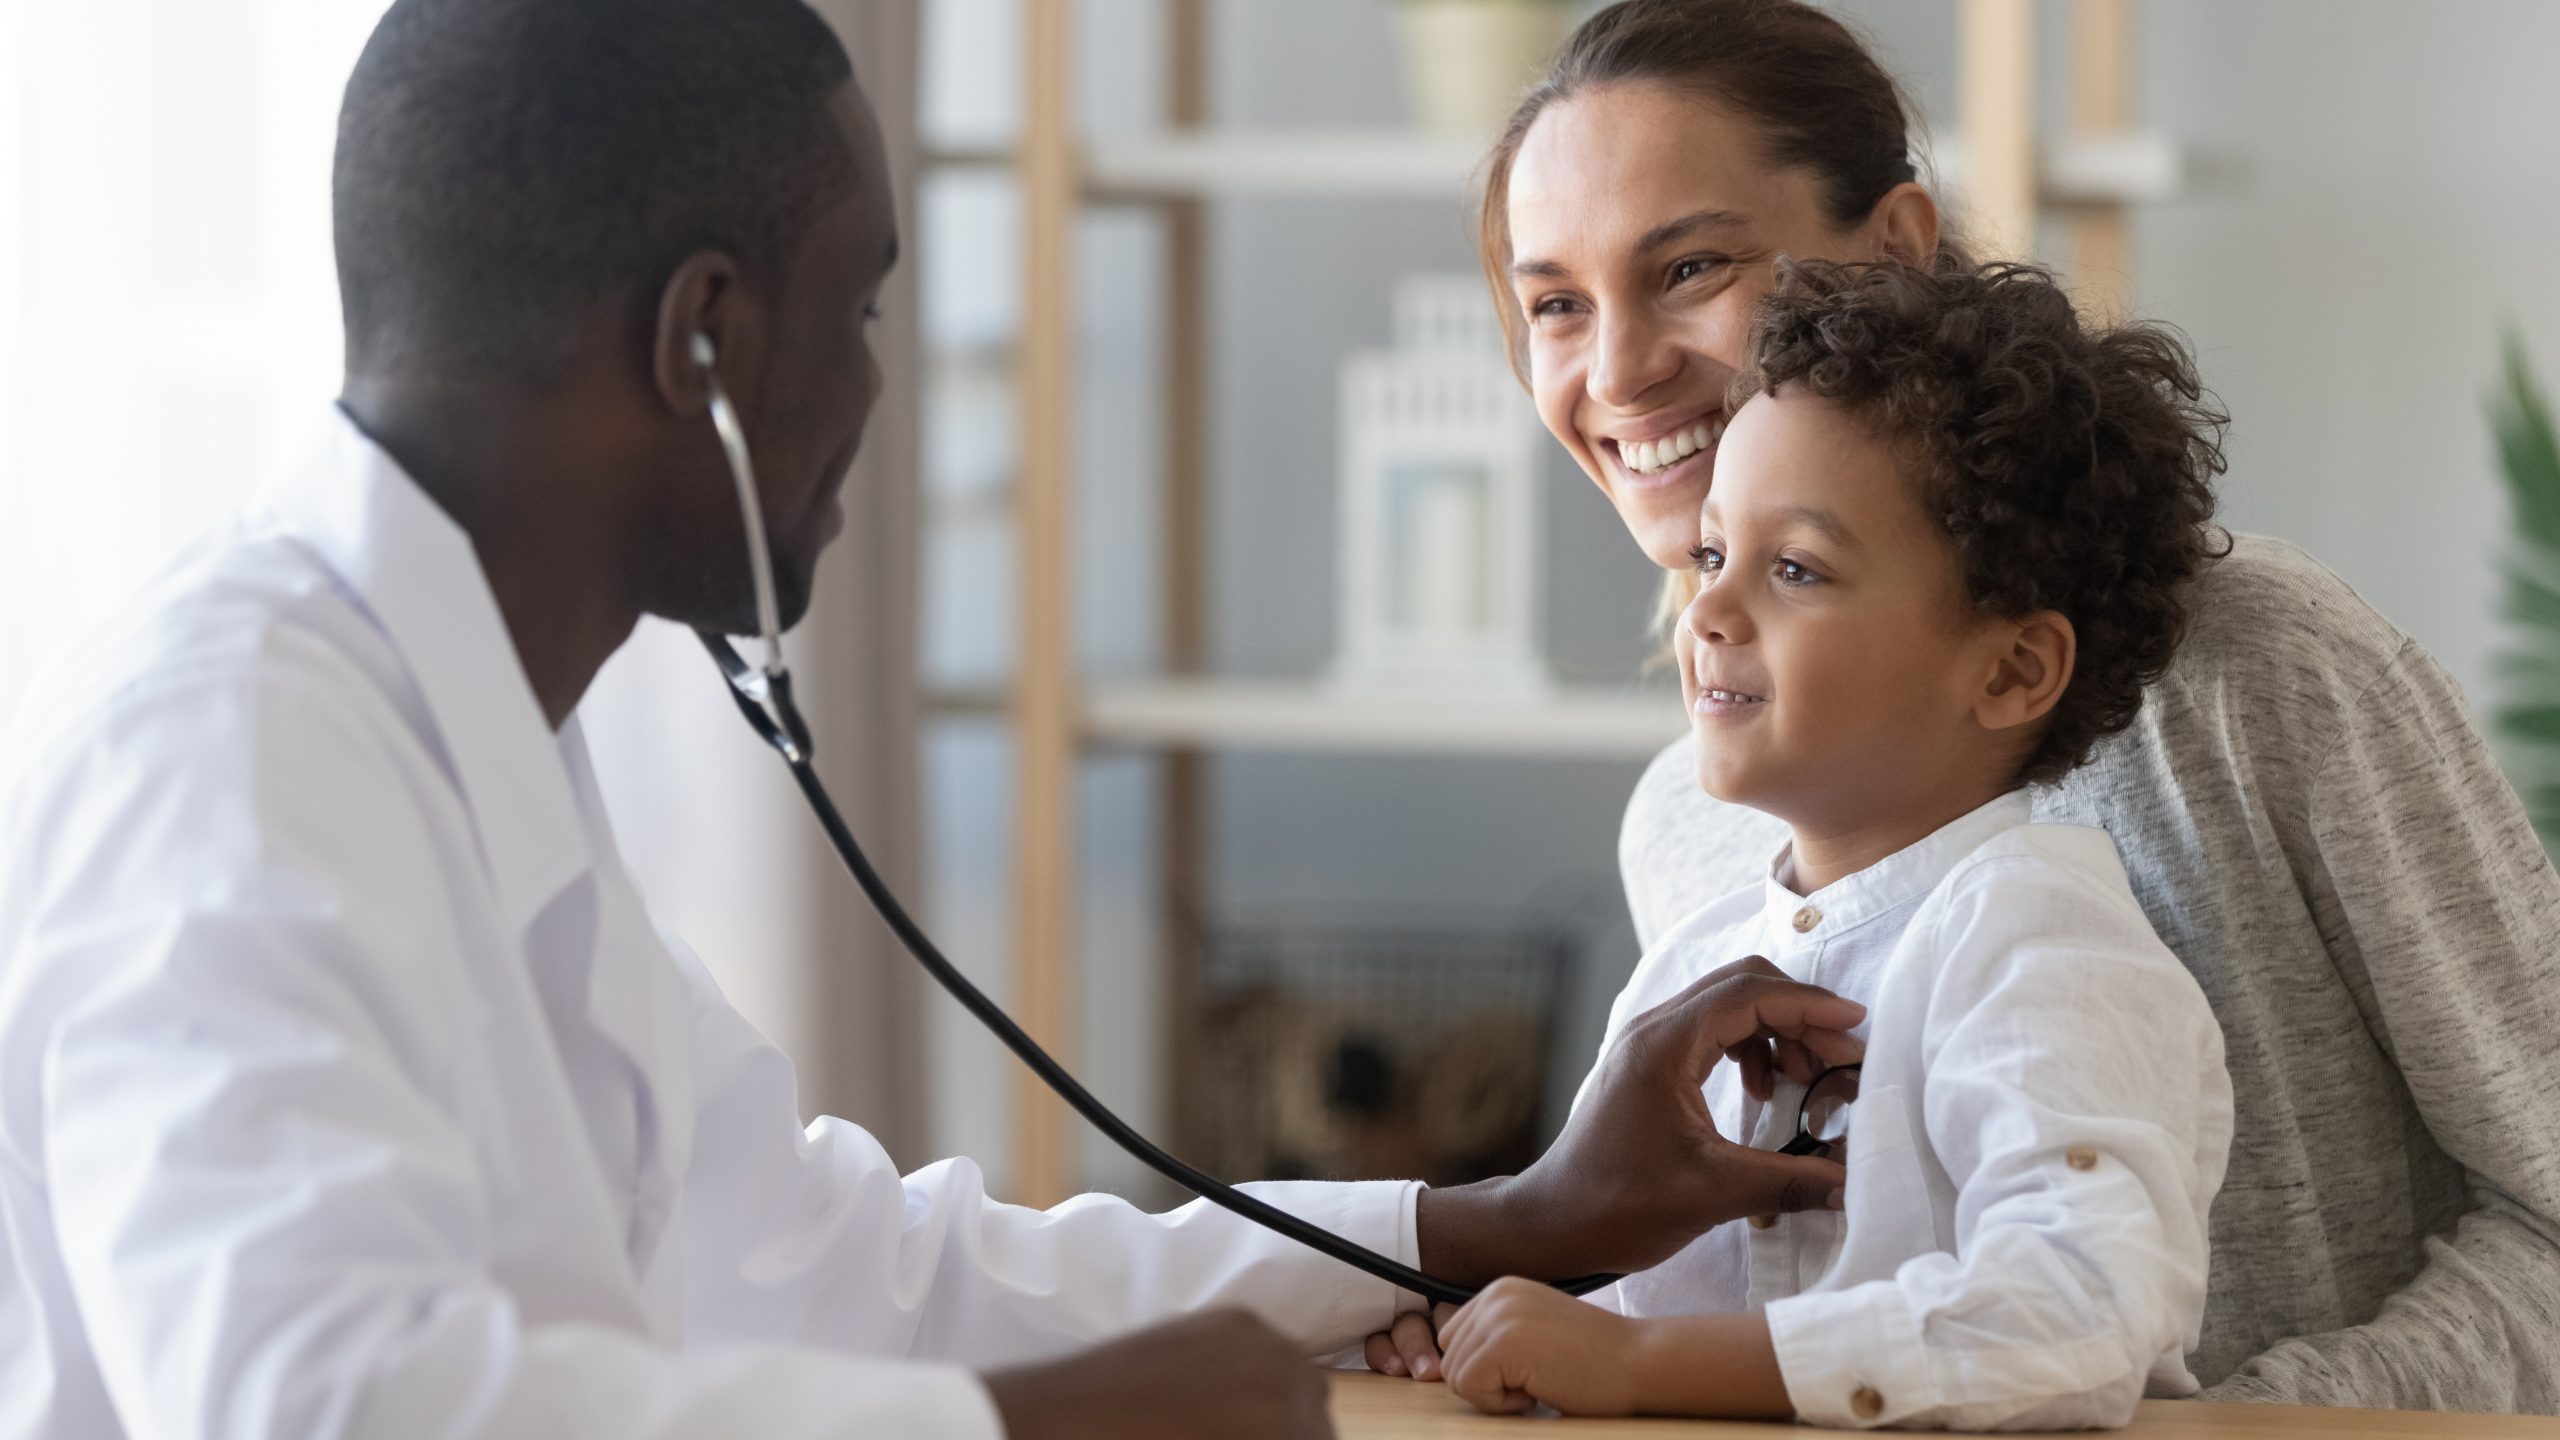 Tips to help your child if they are scared at the doctor